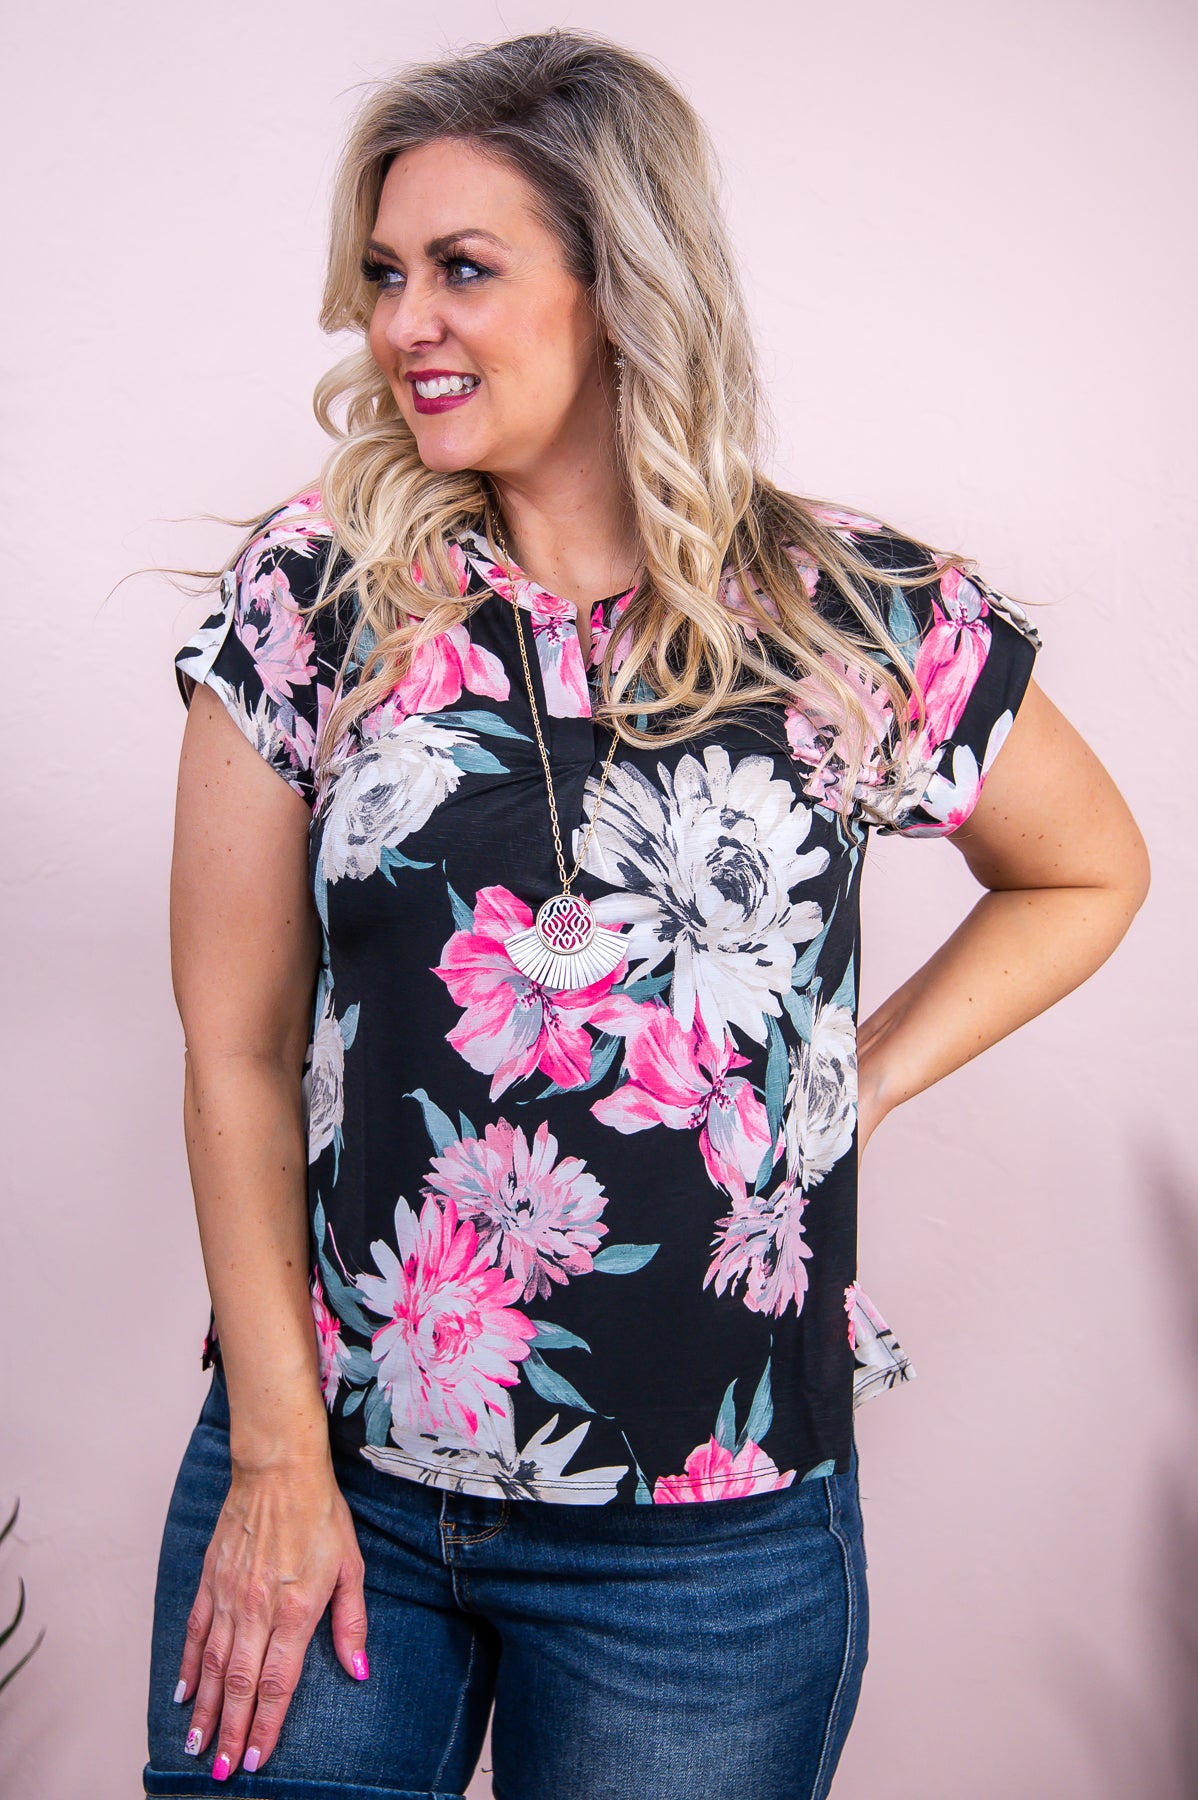 Fresh From The Greenhouse Black/Multi Color Floral Top - T9014BK